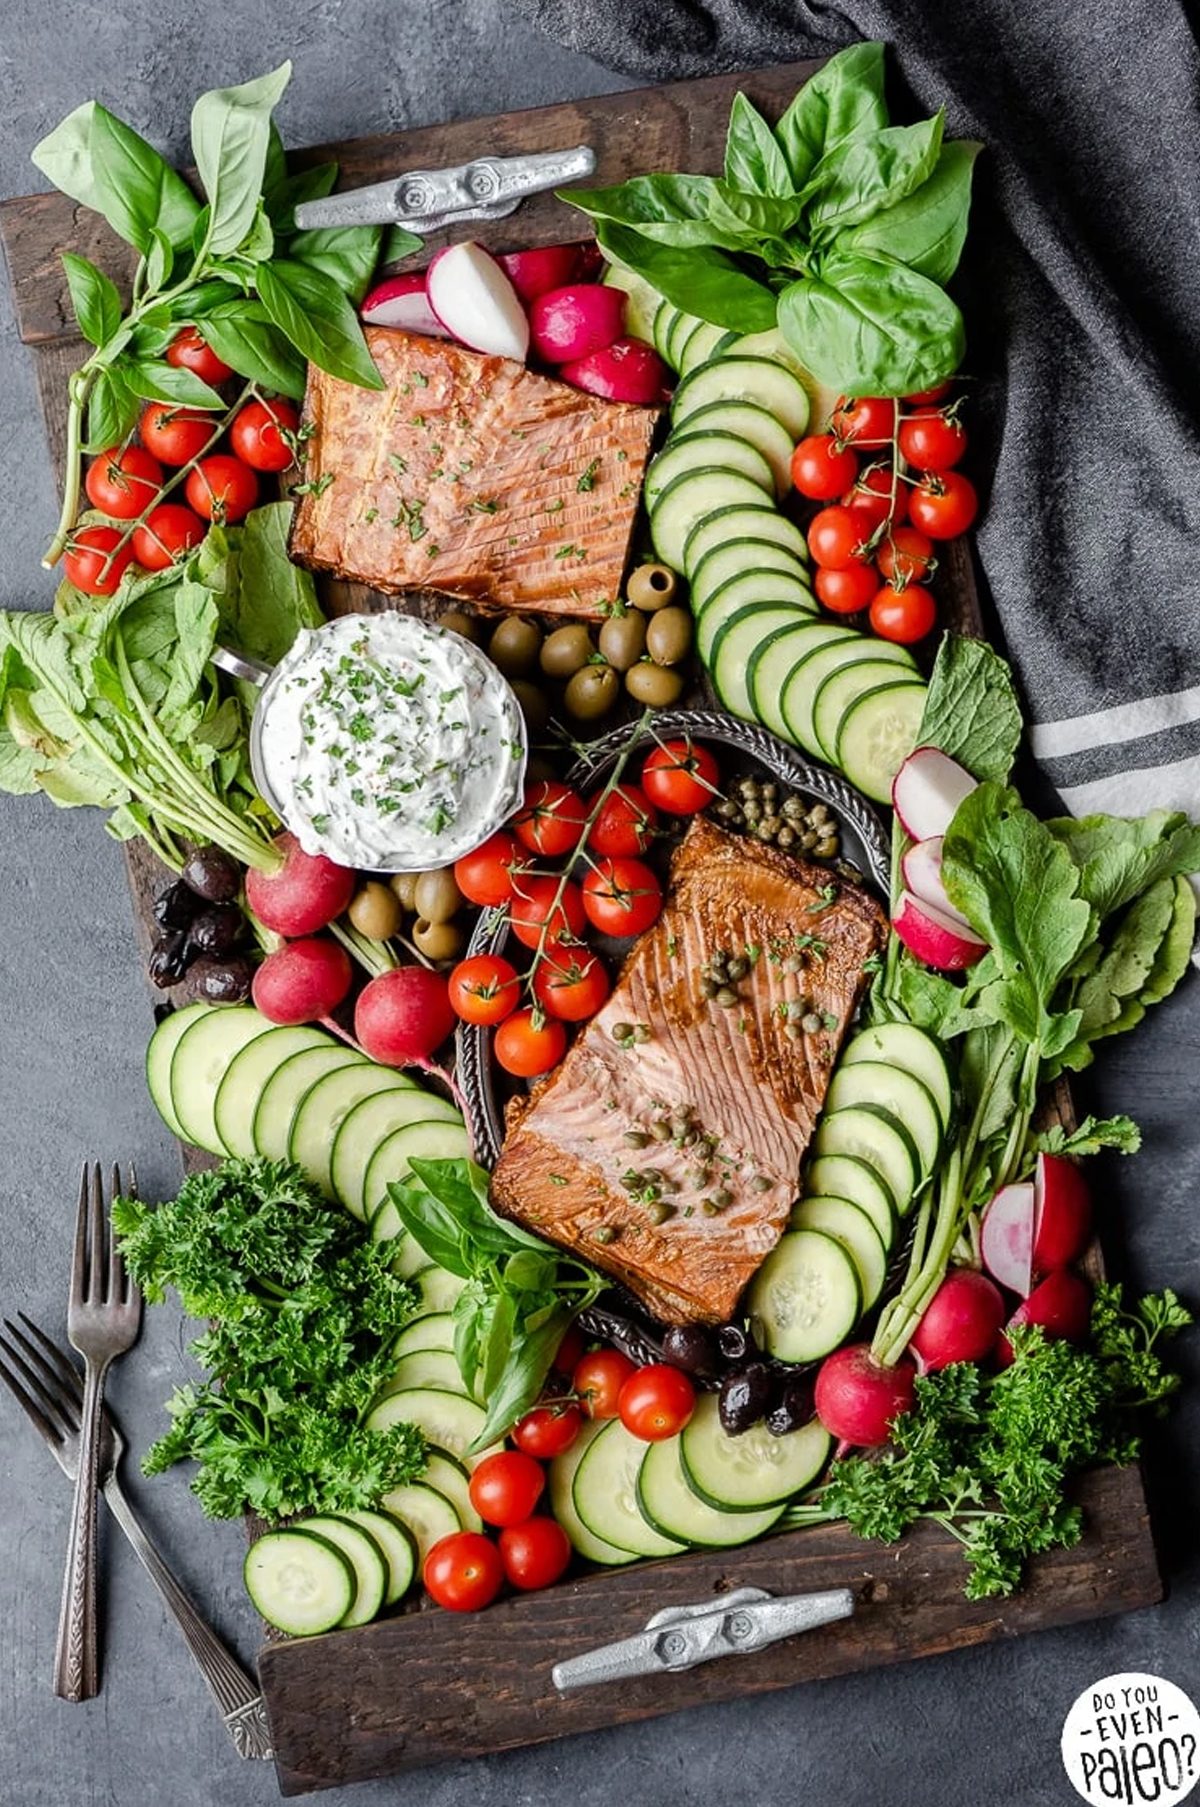 Smoked Salmon, goat cheese, veggies, and herbs are displayed on Chelsea Joy Eats board.